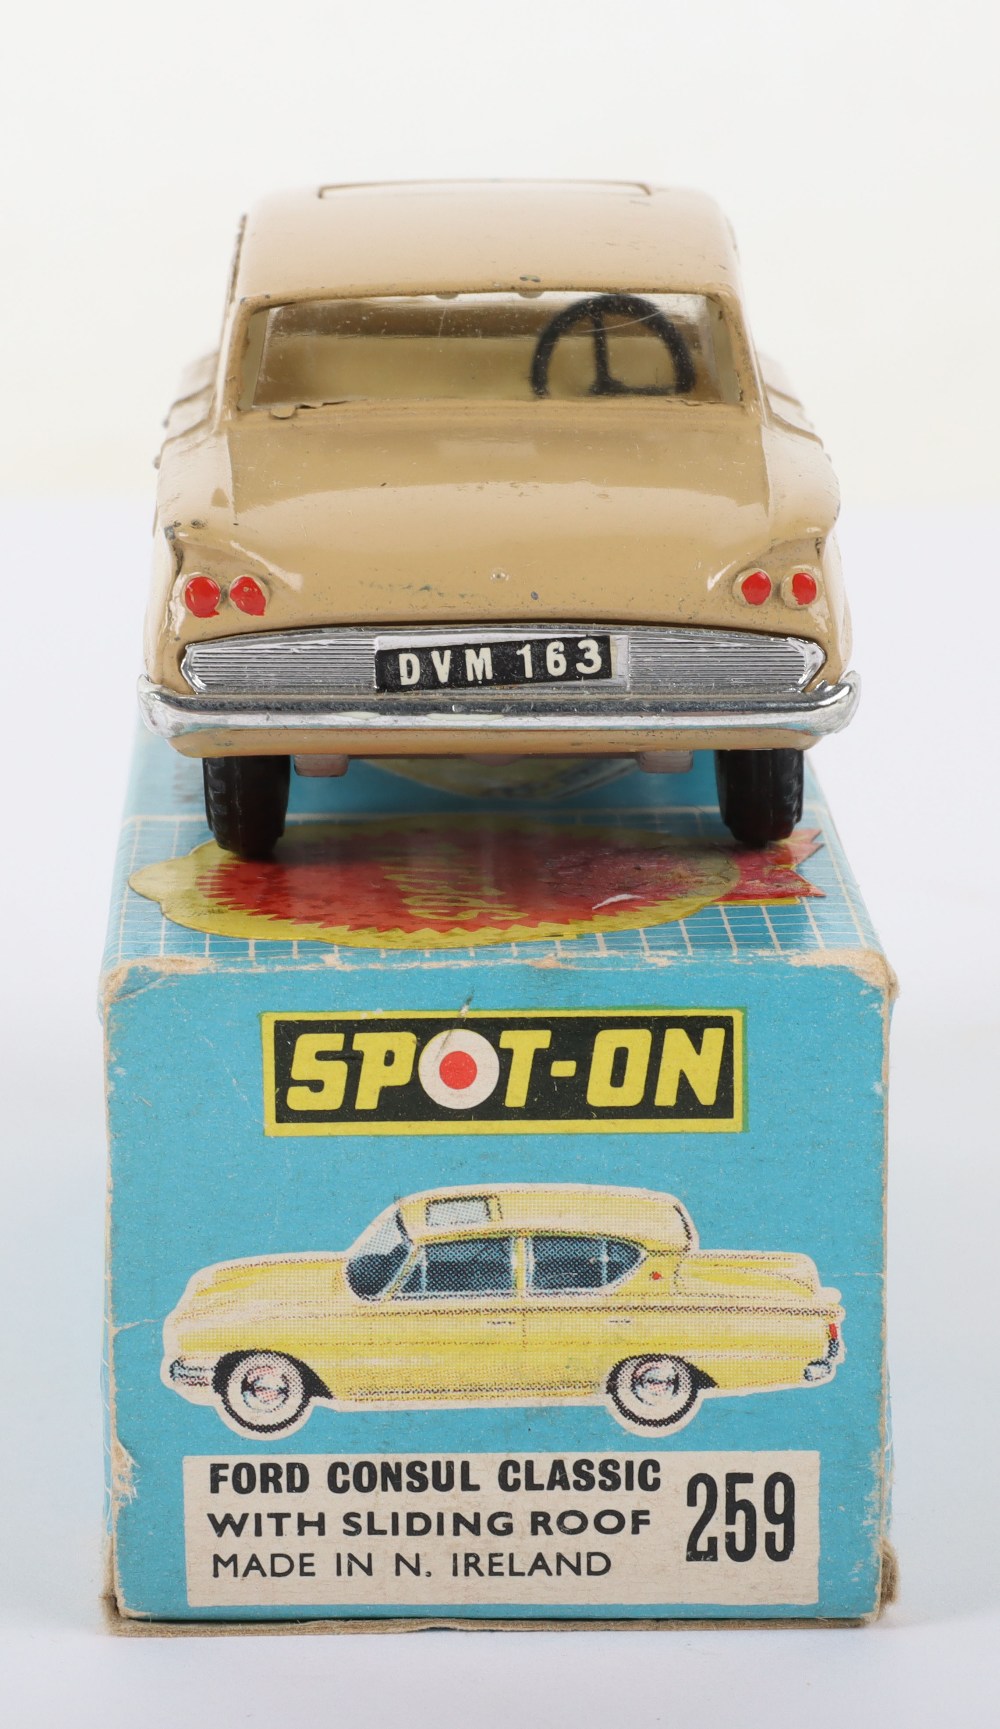 Tri-ang Spot On Model 259 Ford Consul Classic - Image 5 of 7